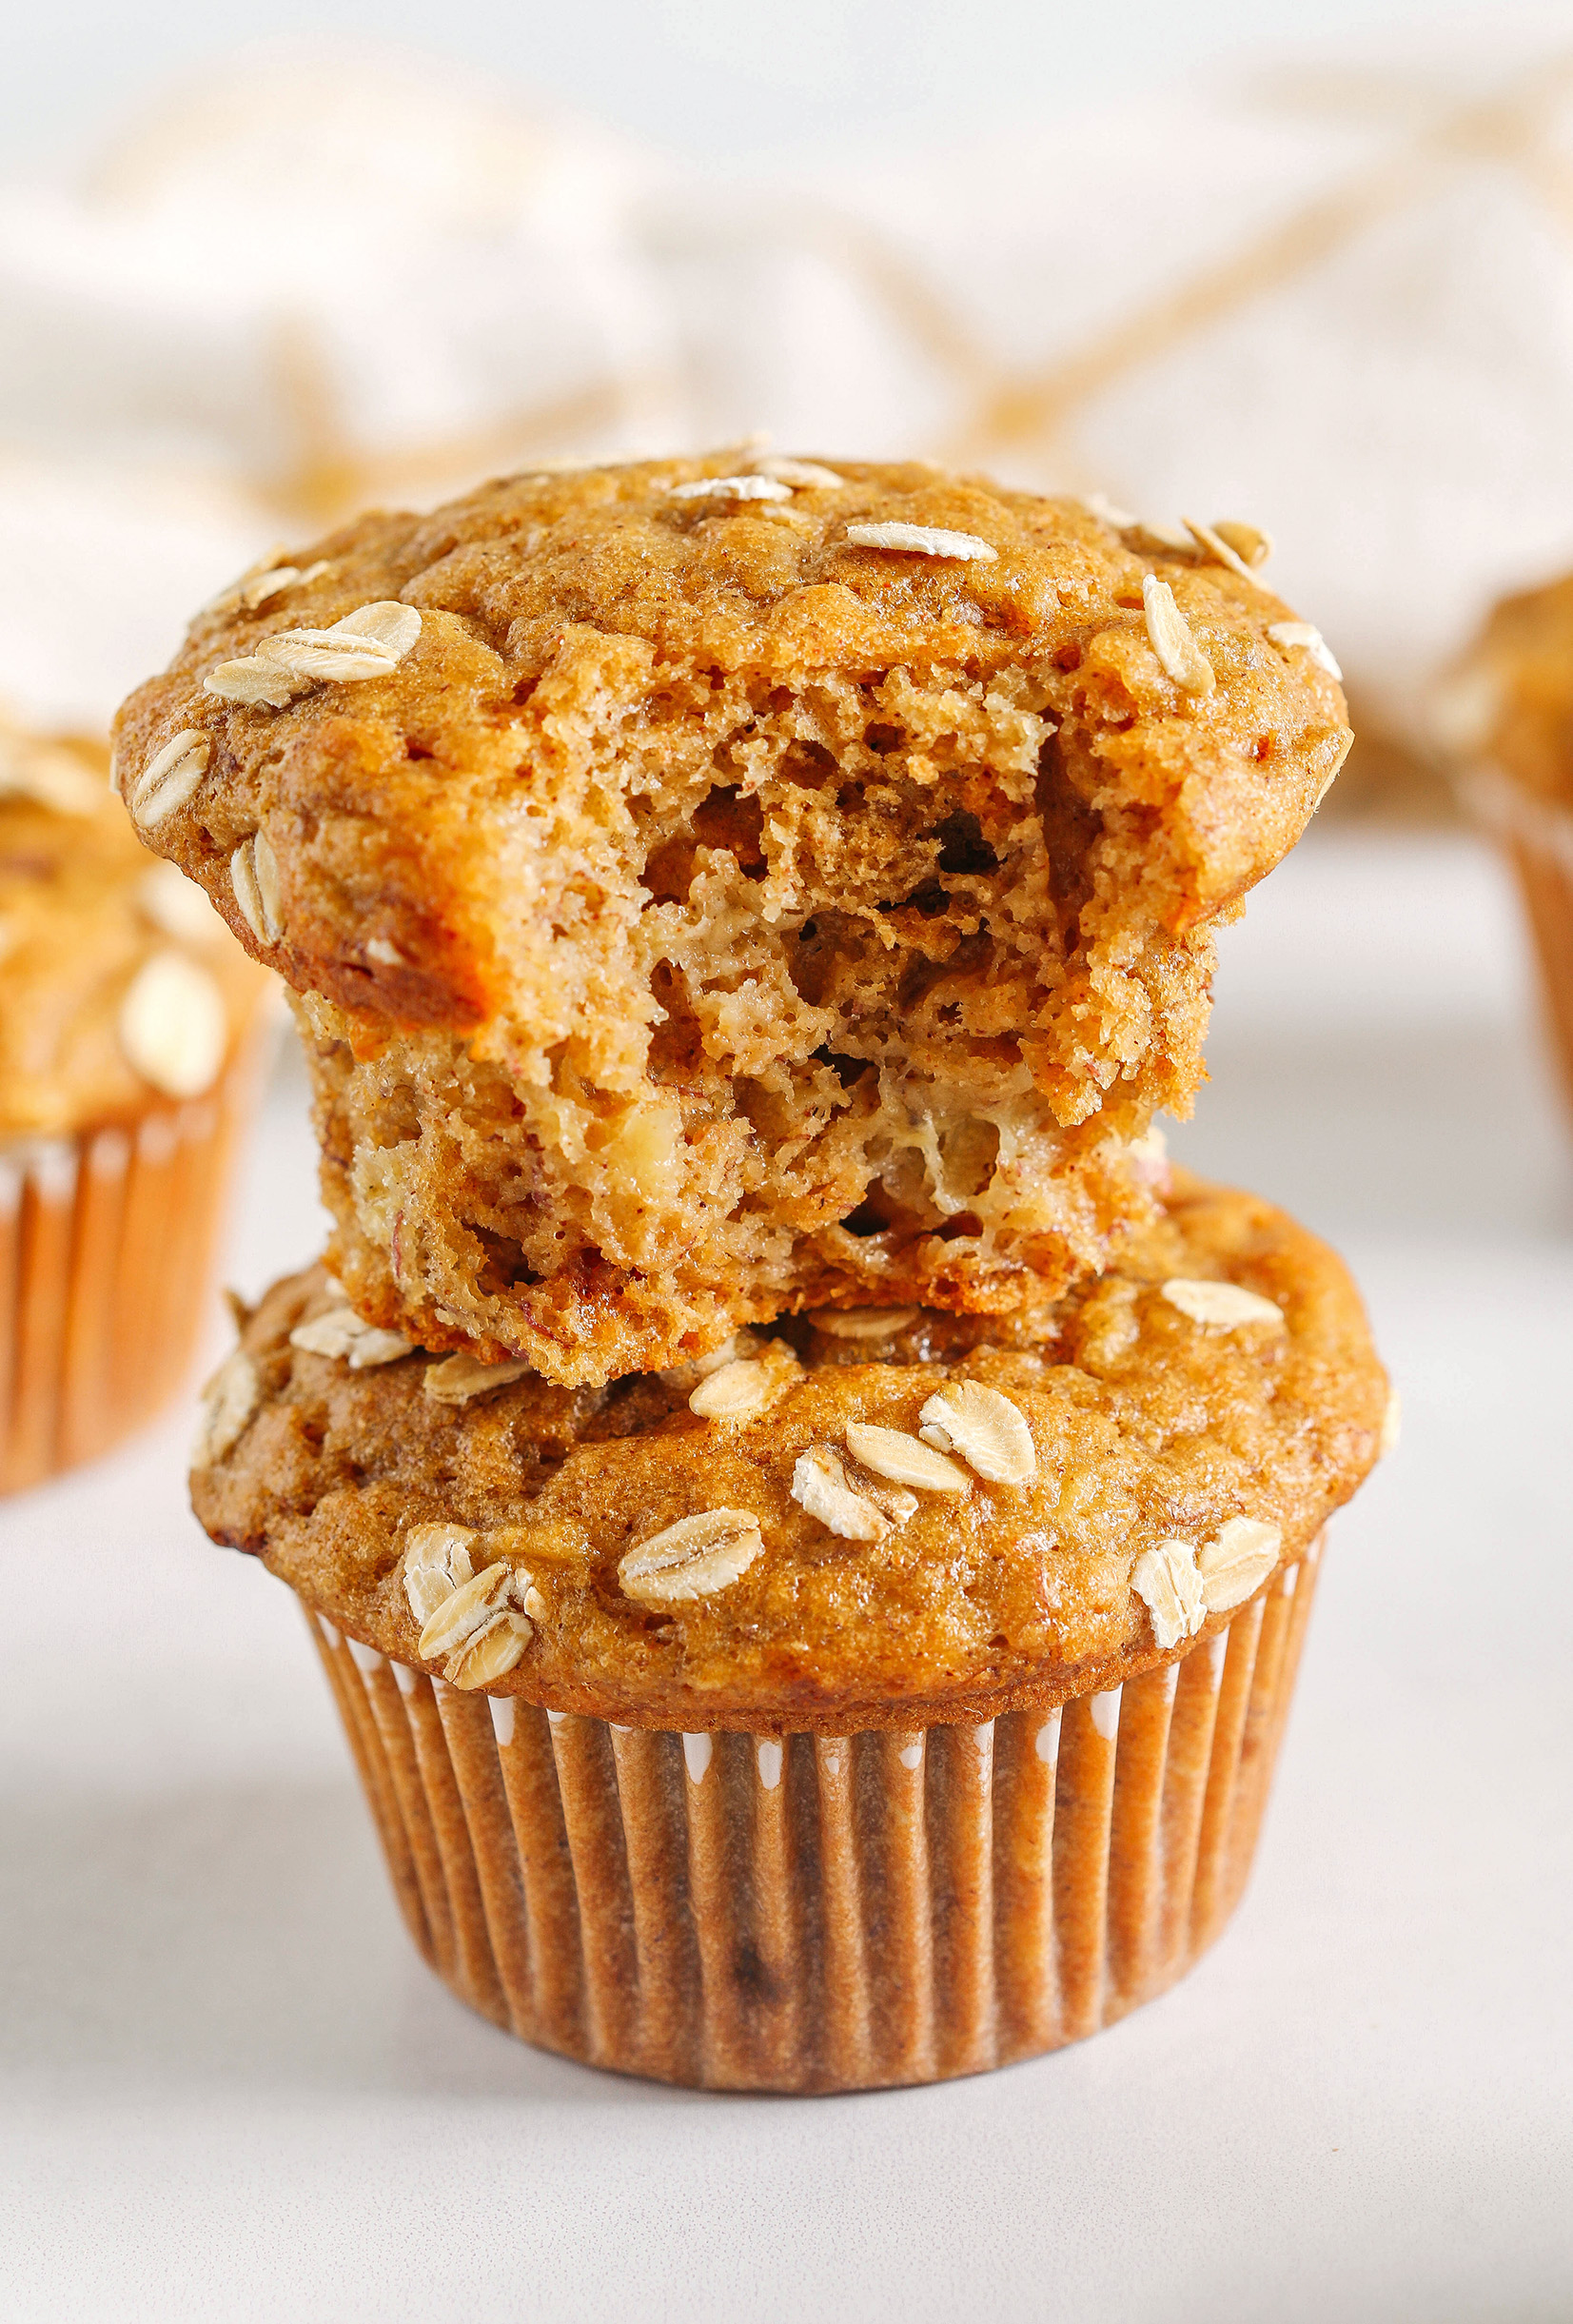 These Banana Breakfast Muffins are moist, fluffy, and made healthier with whole wheat flour, Greek yogurt, and zero butter or refined sugar.  Loaded with delicious banana flavor and warm spices for the perfect morning muffin!